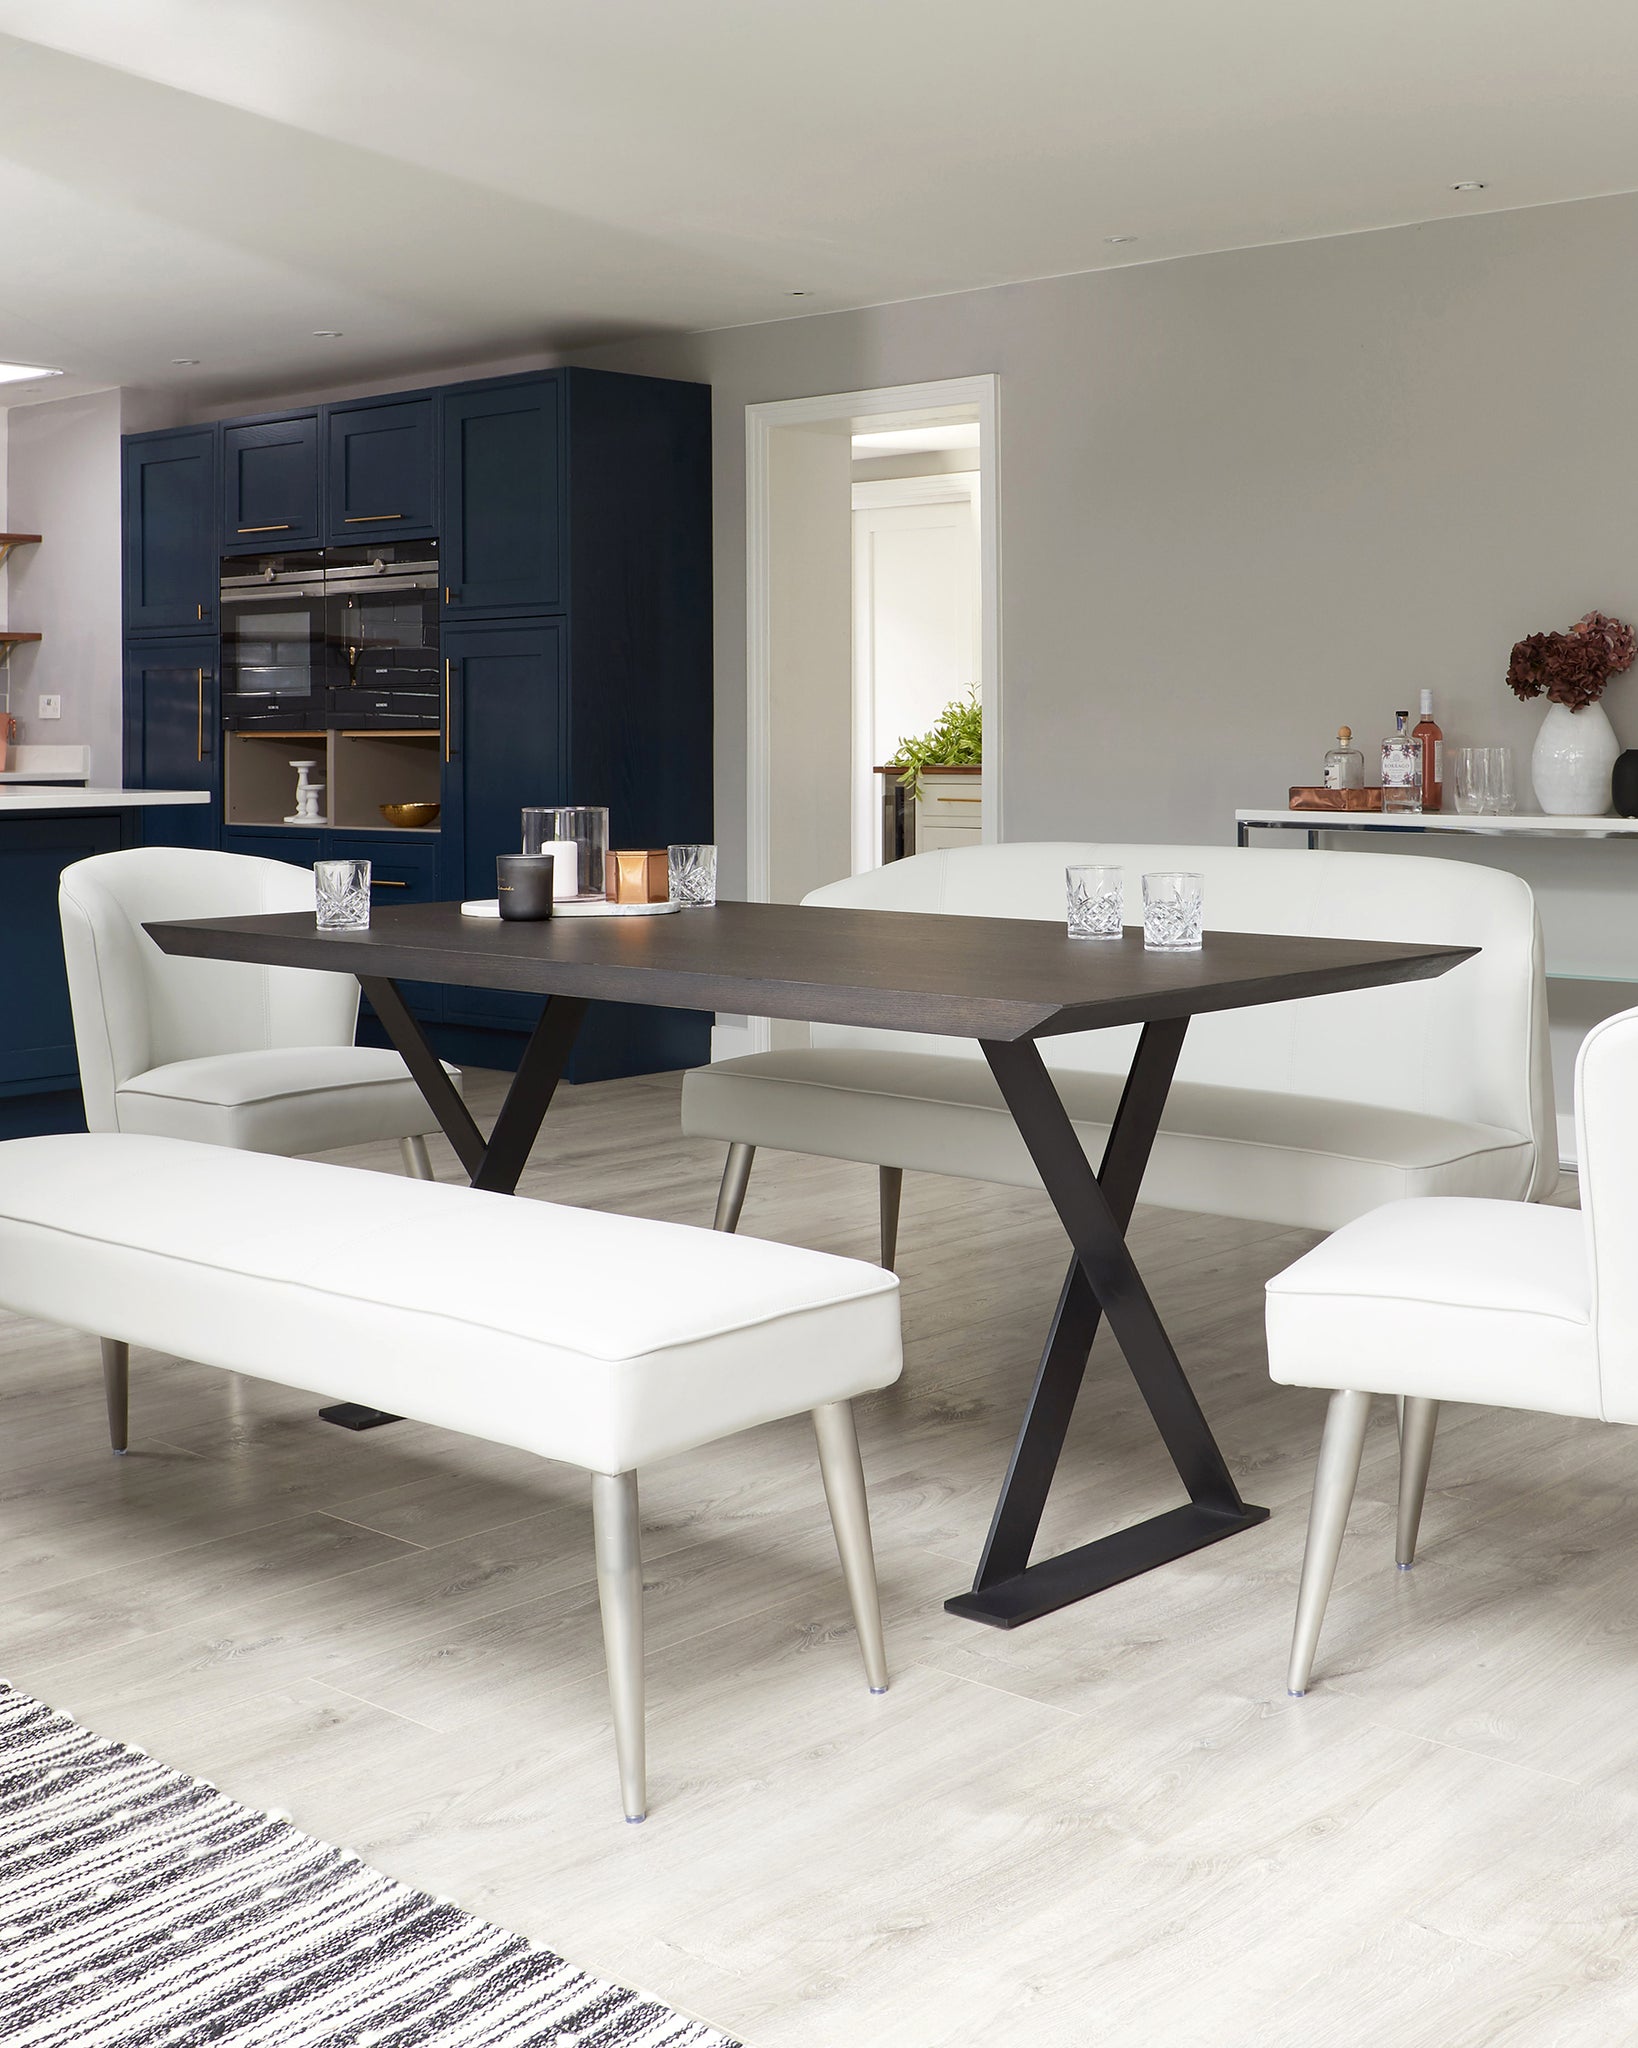 How To Choose The Perfect Dining Bench Danetti